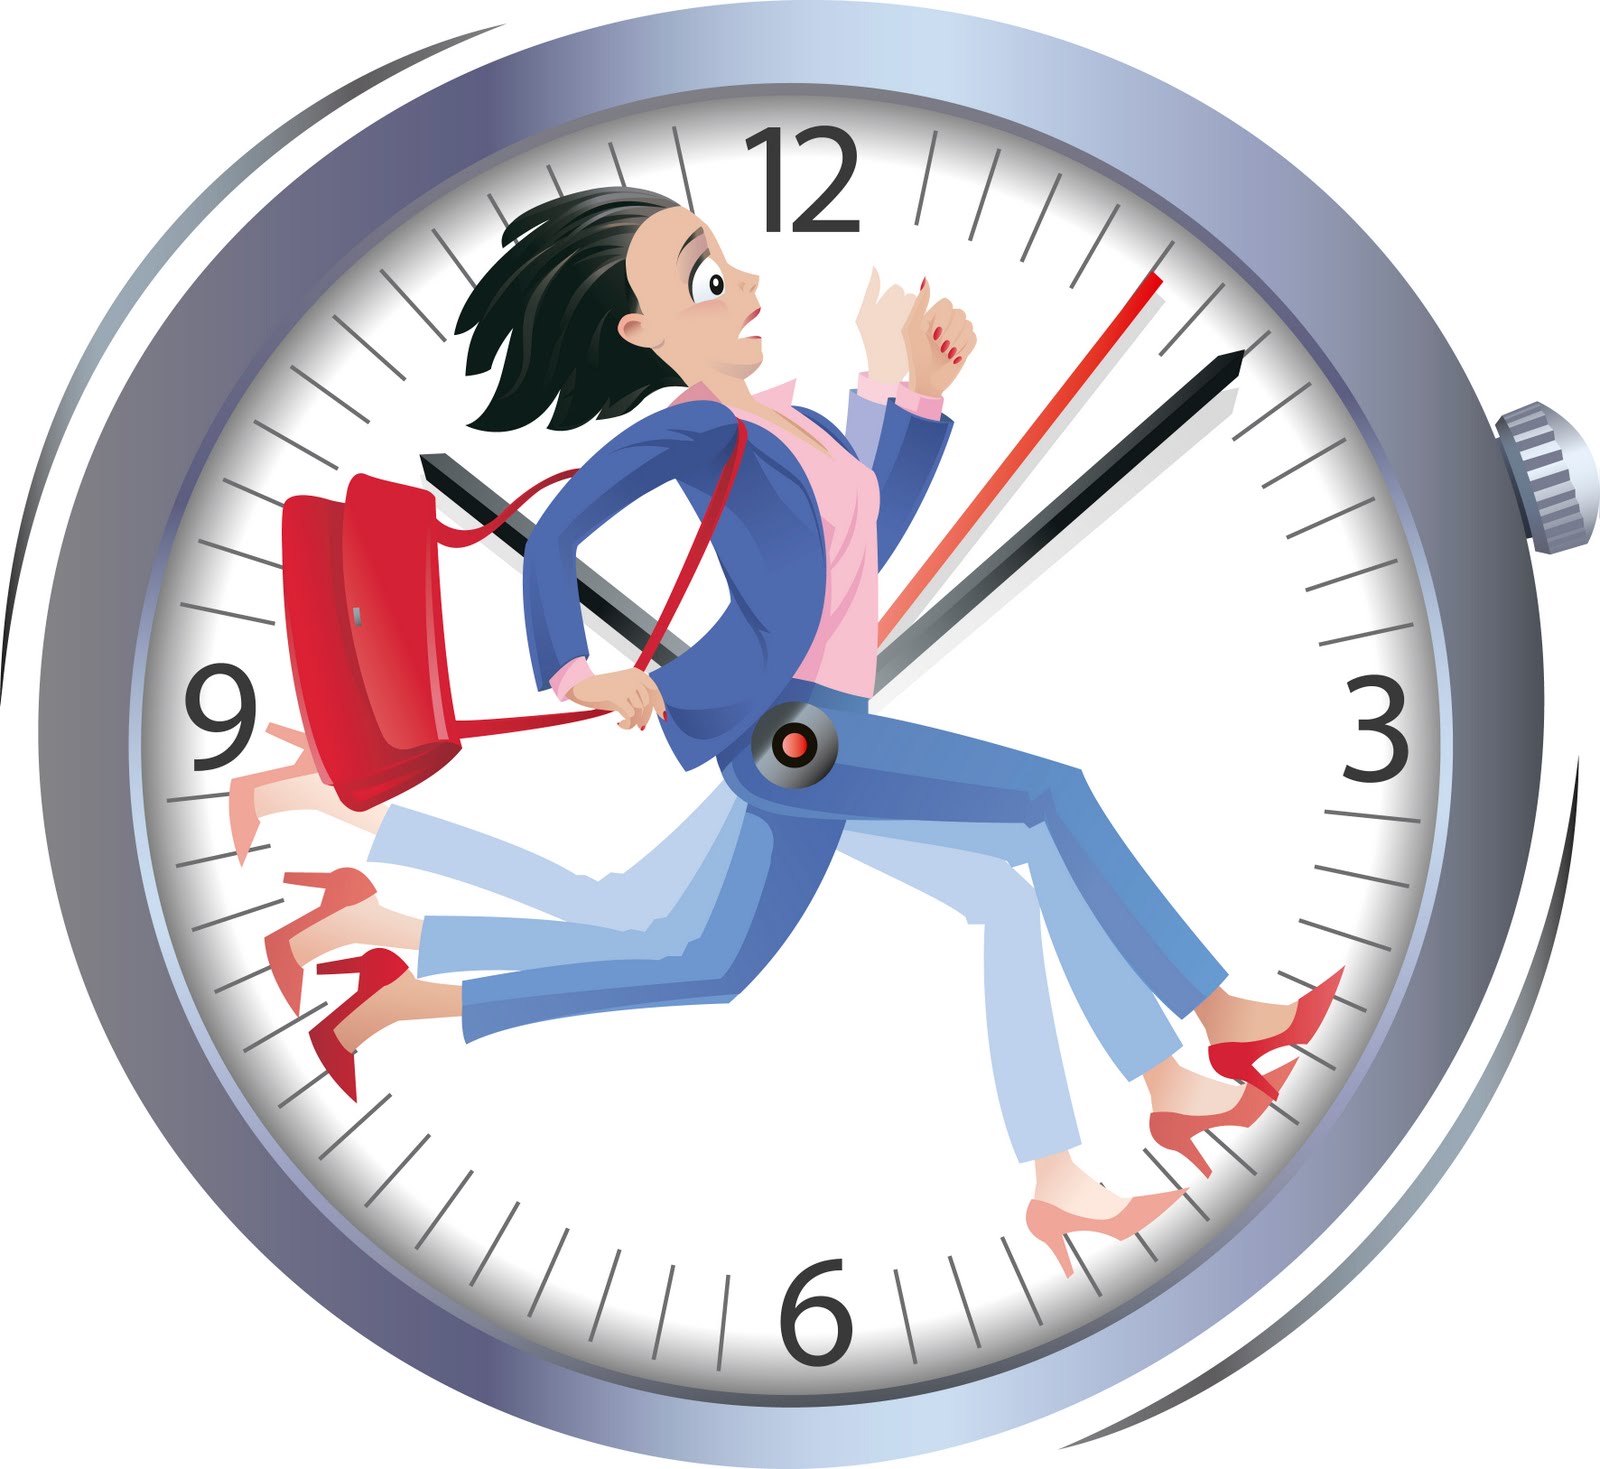 Top 10 Tips for Successful Time Management